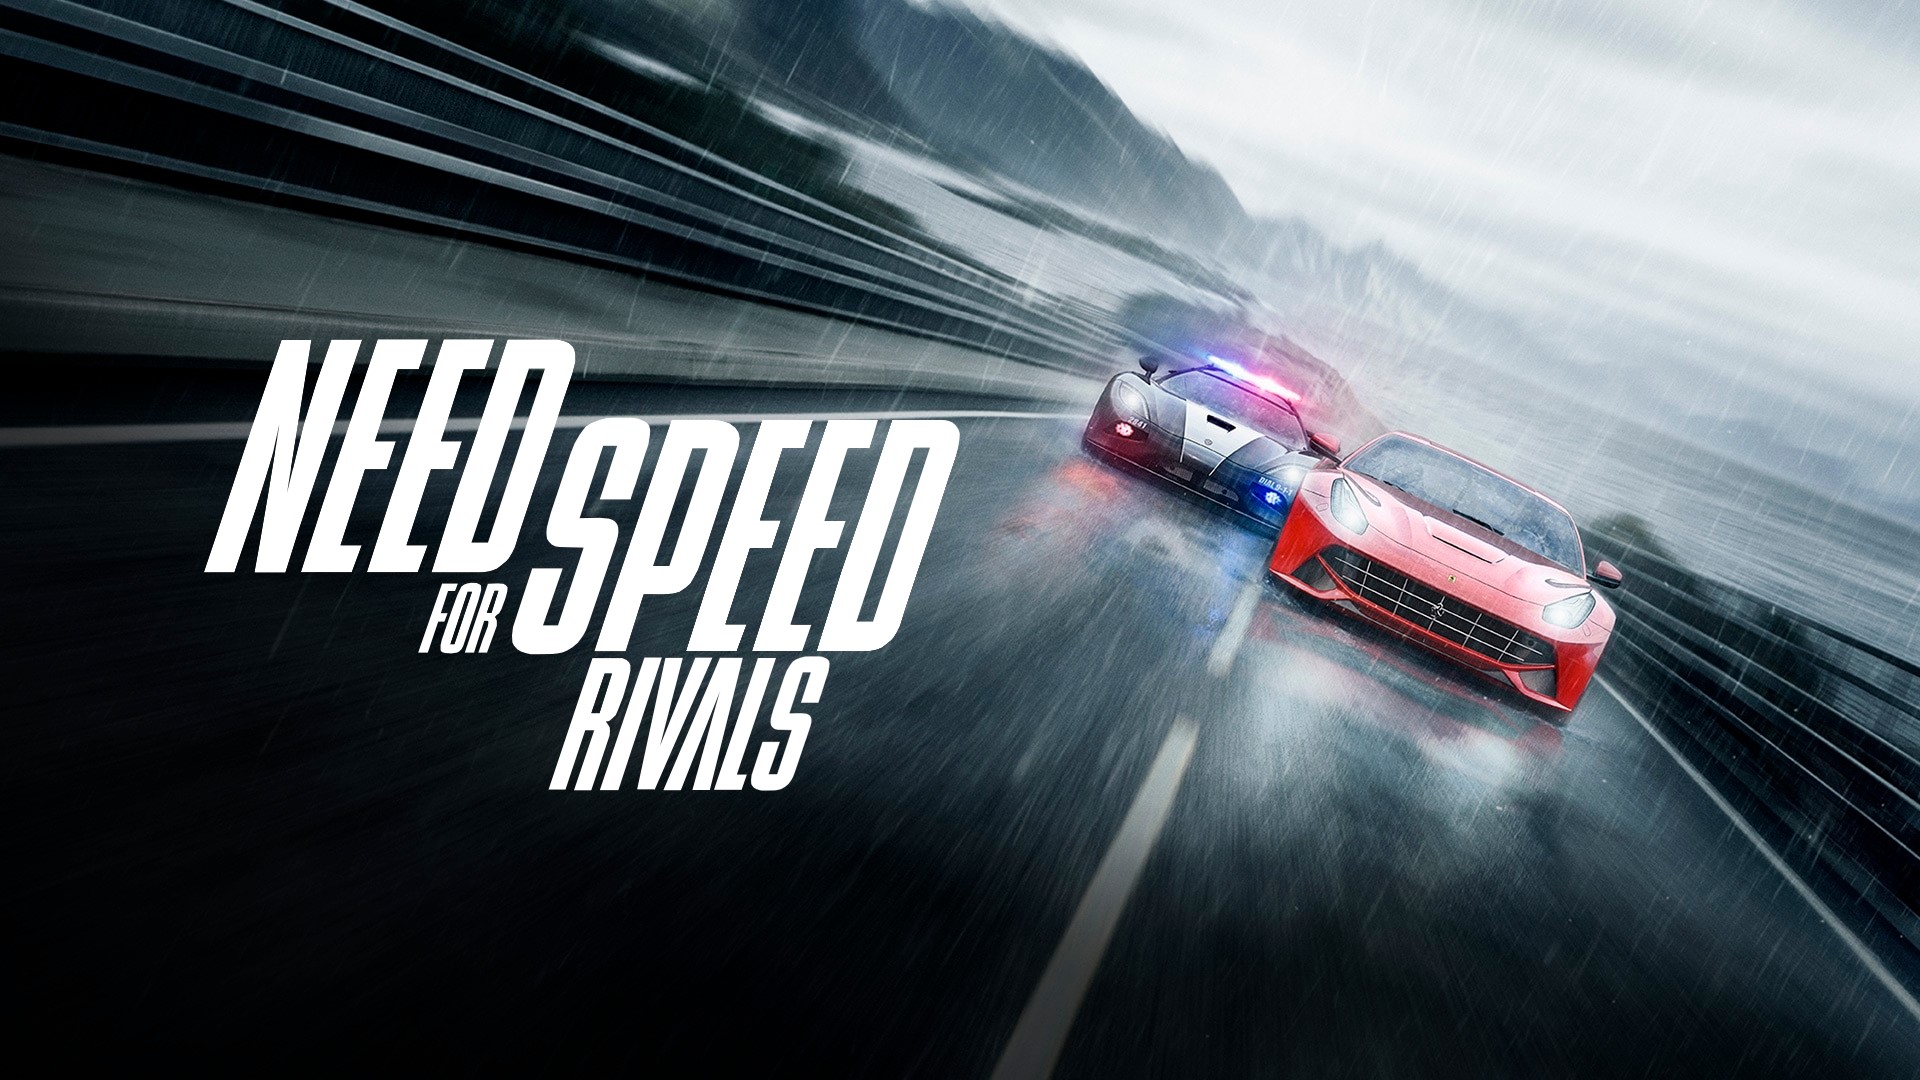 Need for Speed Rivals / Online Origin / Full Access / Warranty / Inactive / Gift